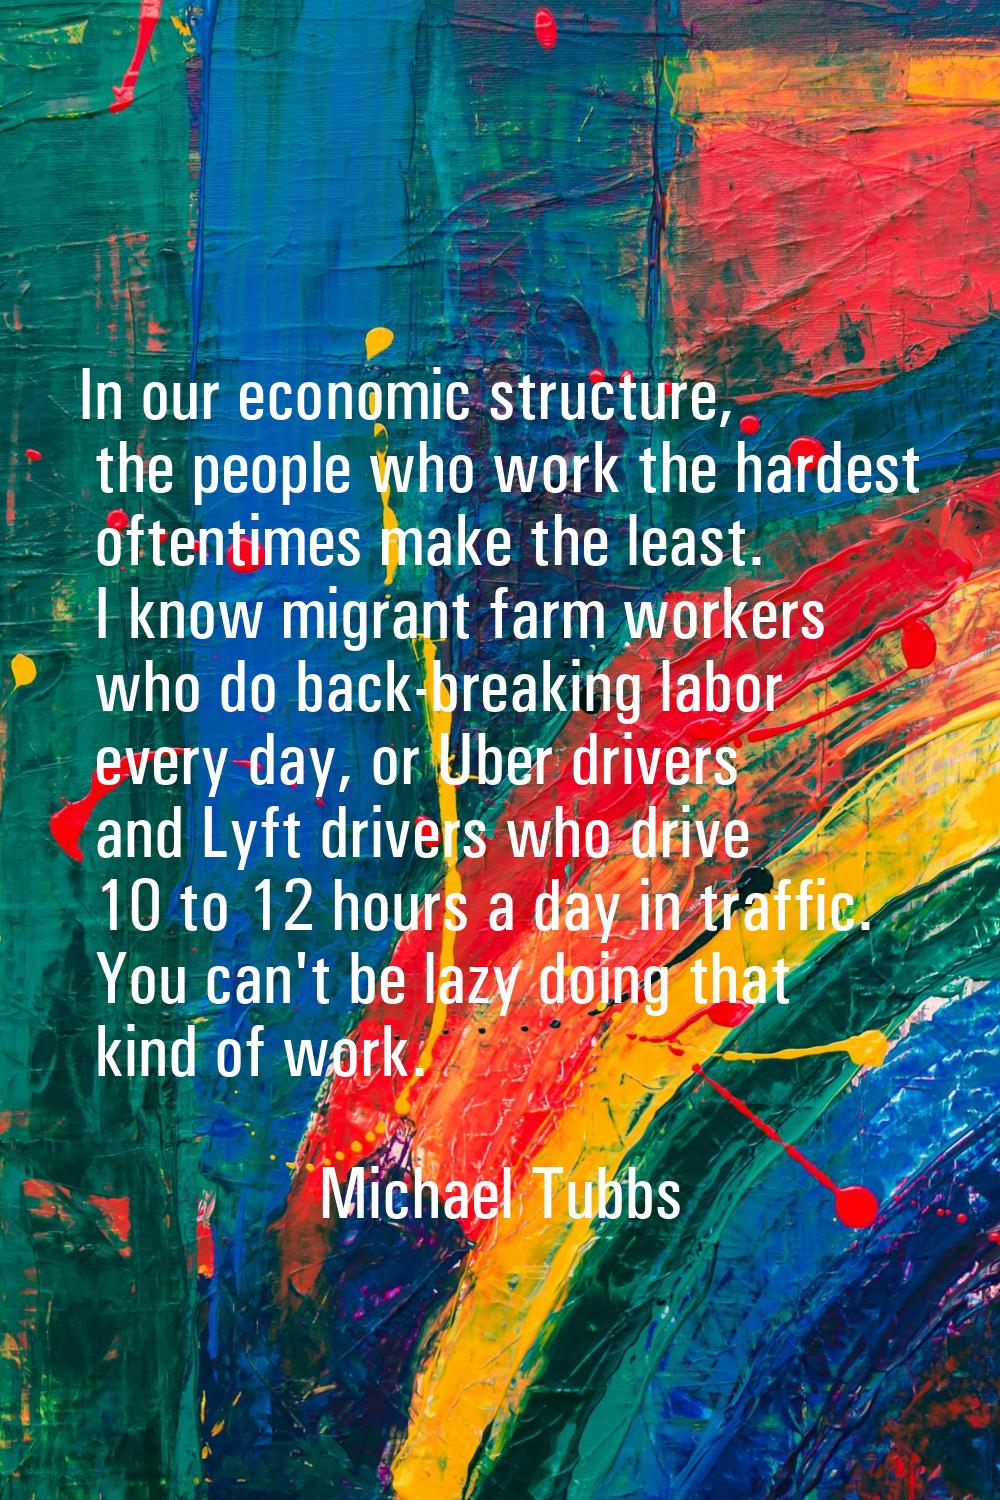 In our economic structure, the people who work the hardest oftentimes make the least. I know migran